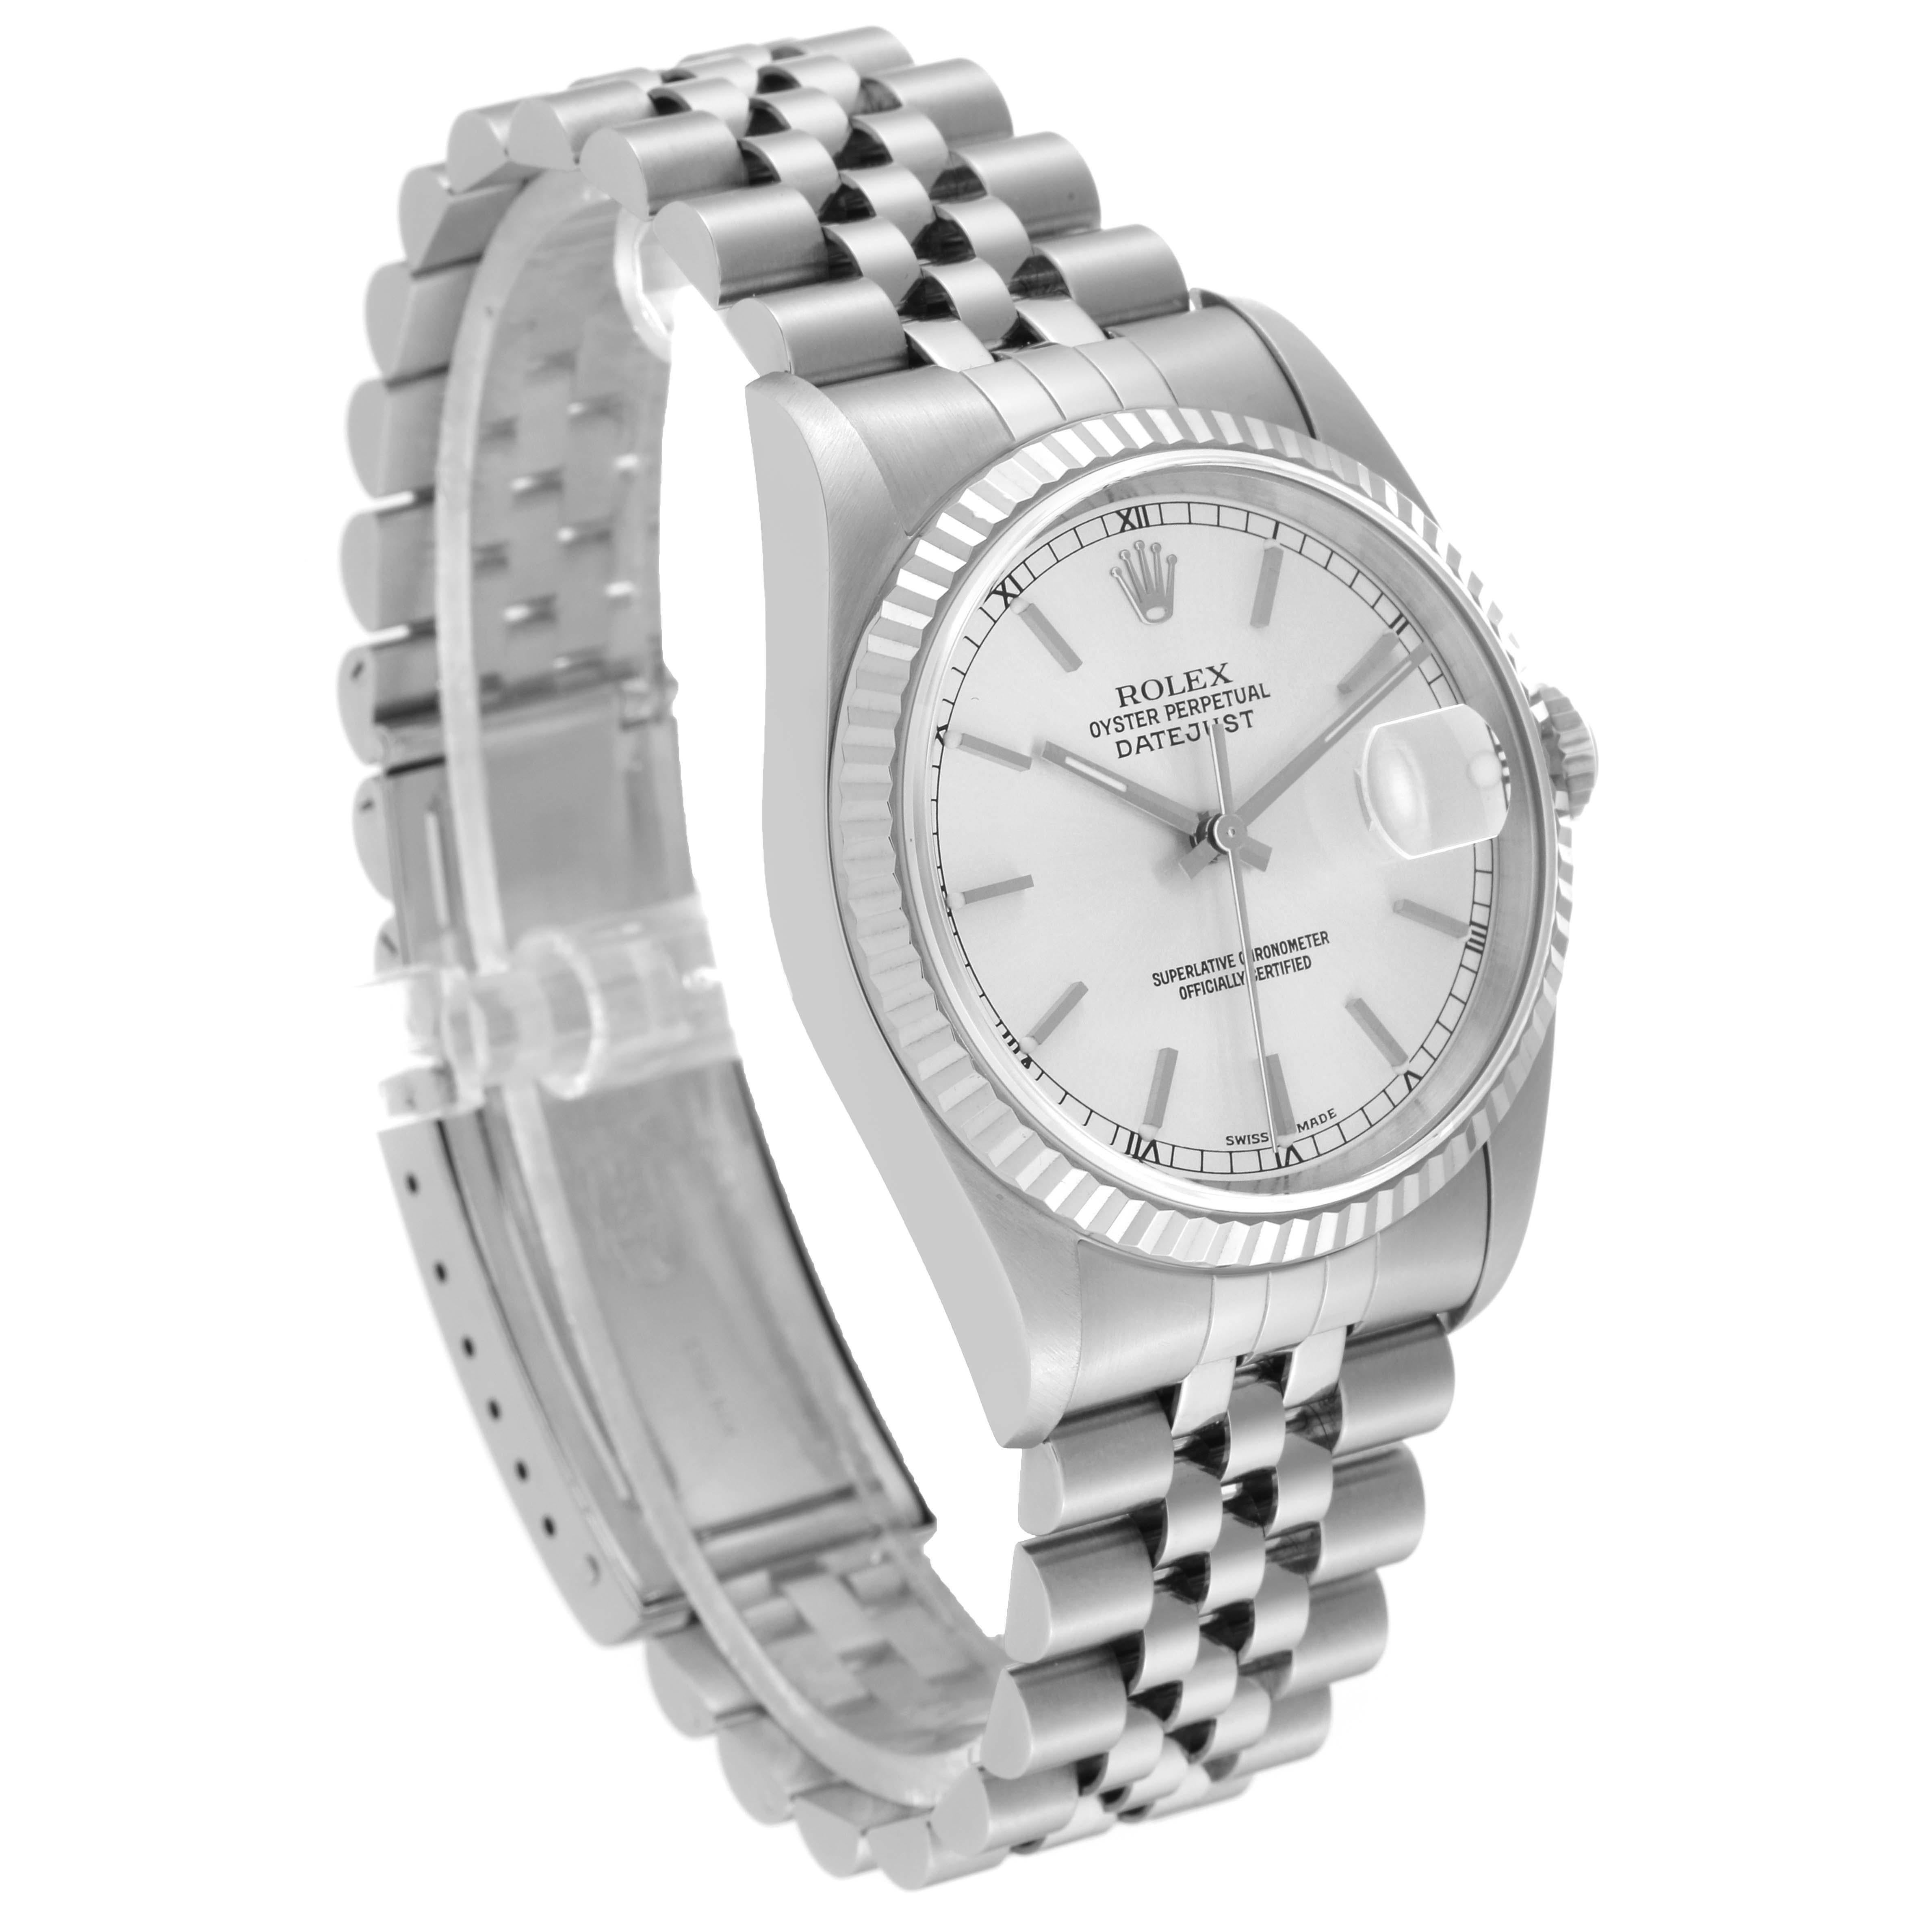 Rolex Datejust Silver Dial Steel White Gold Mens Watch 16234 7